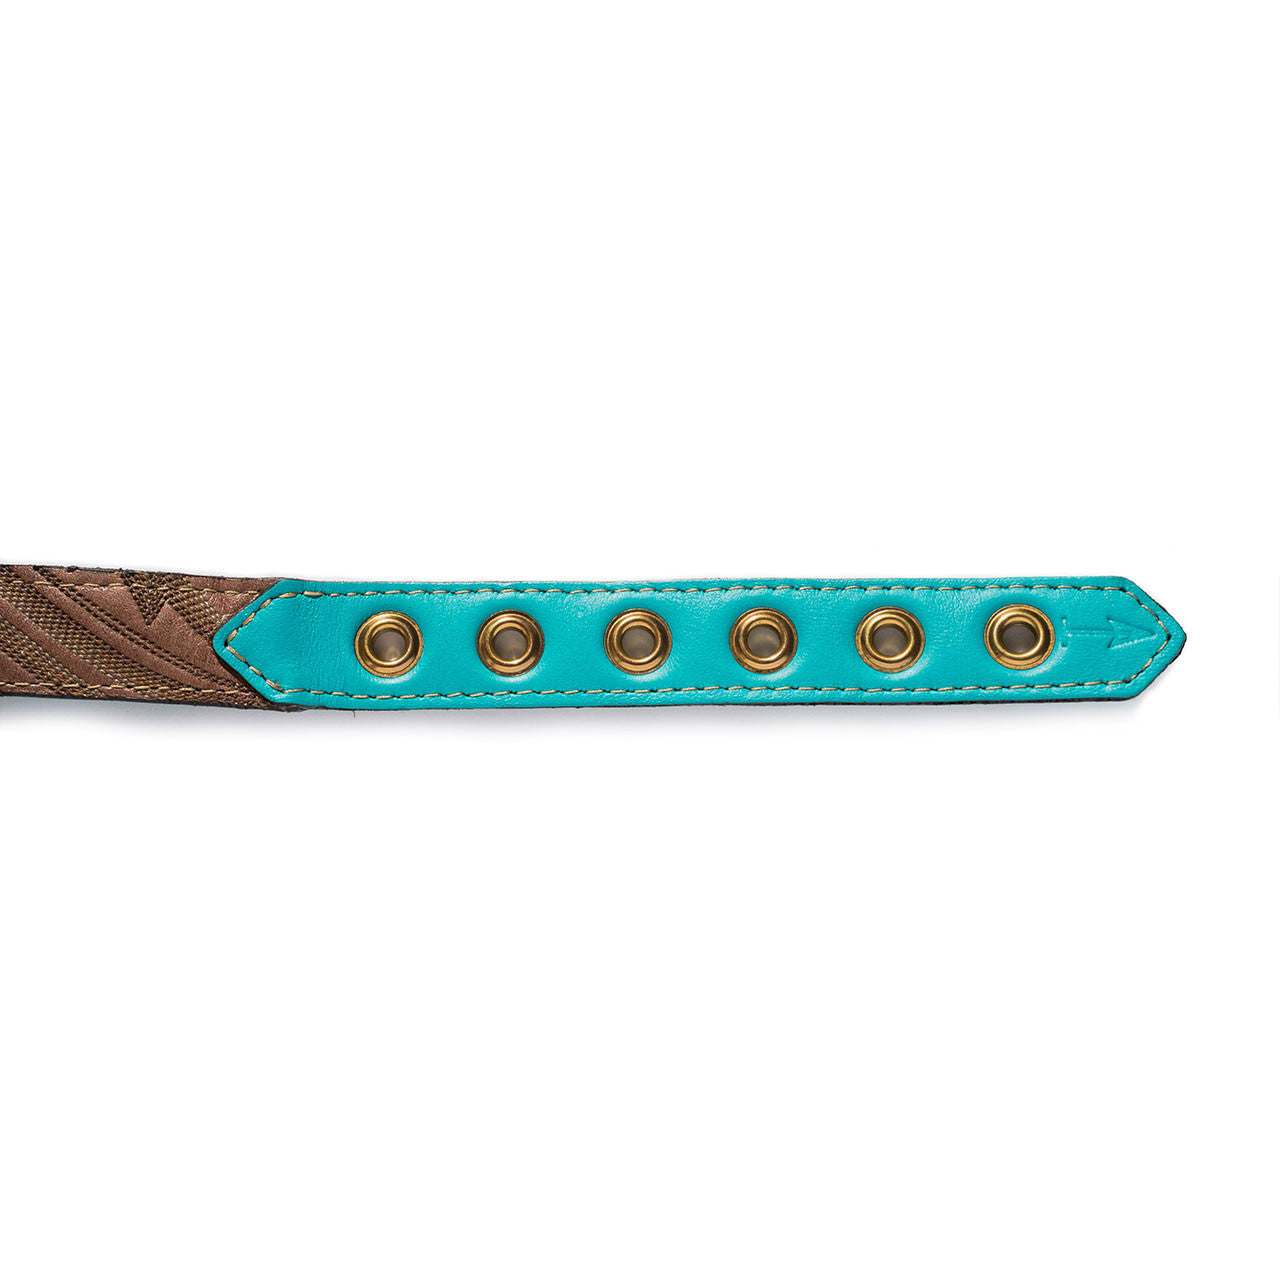 Turquoise Dog Collar with Mahogany Leather + Brown/Yellow/Ivory Stitching